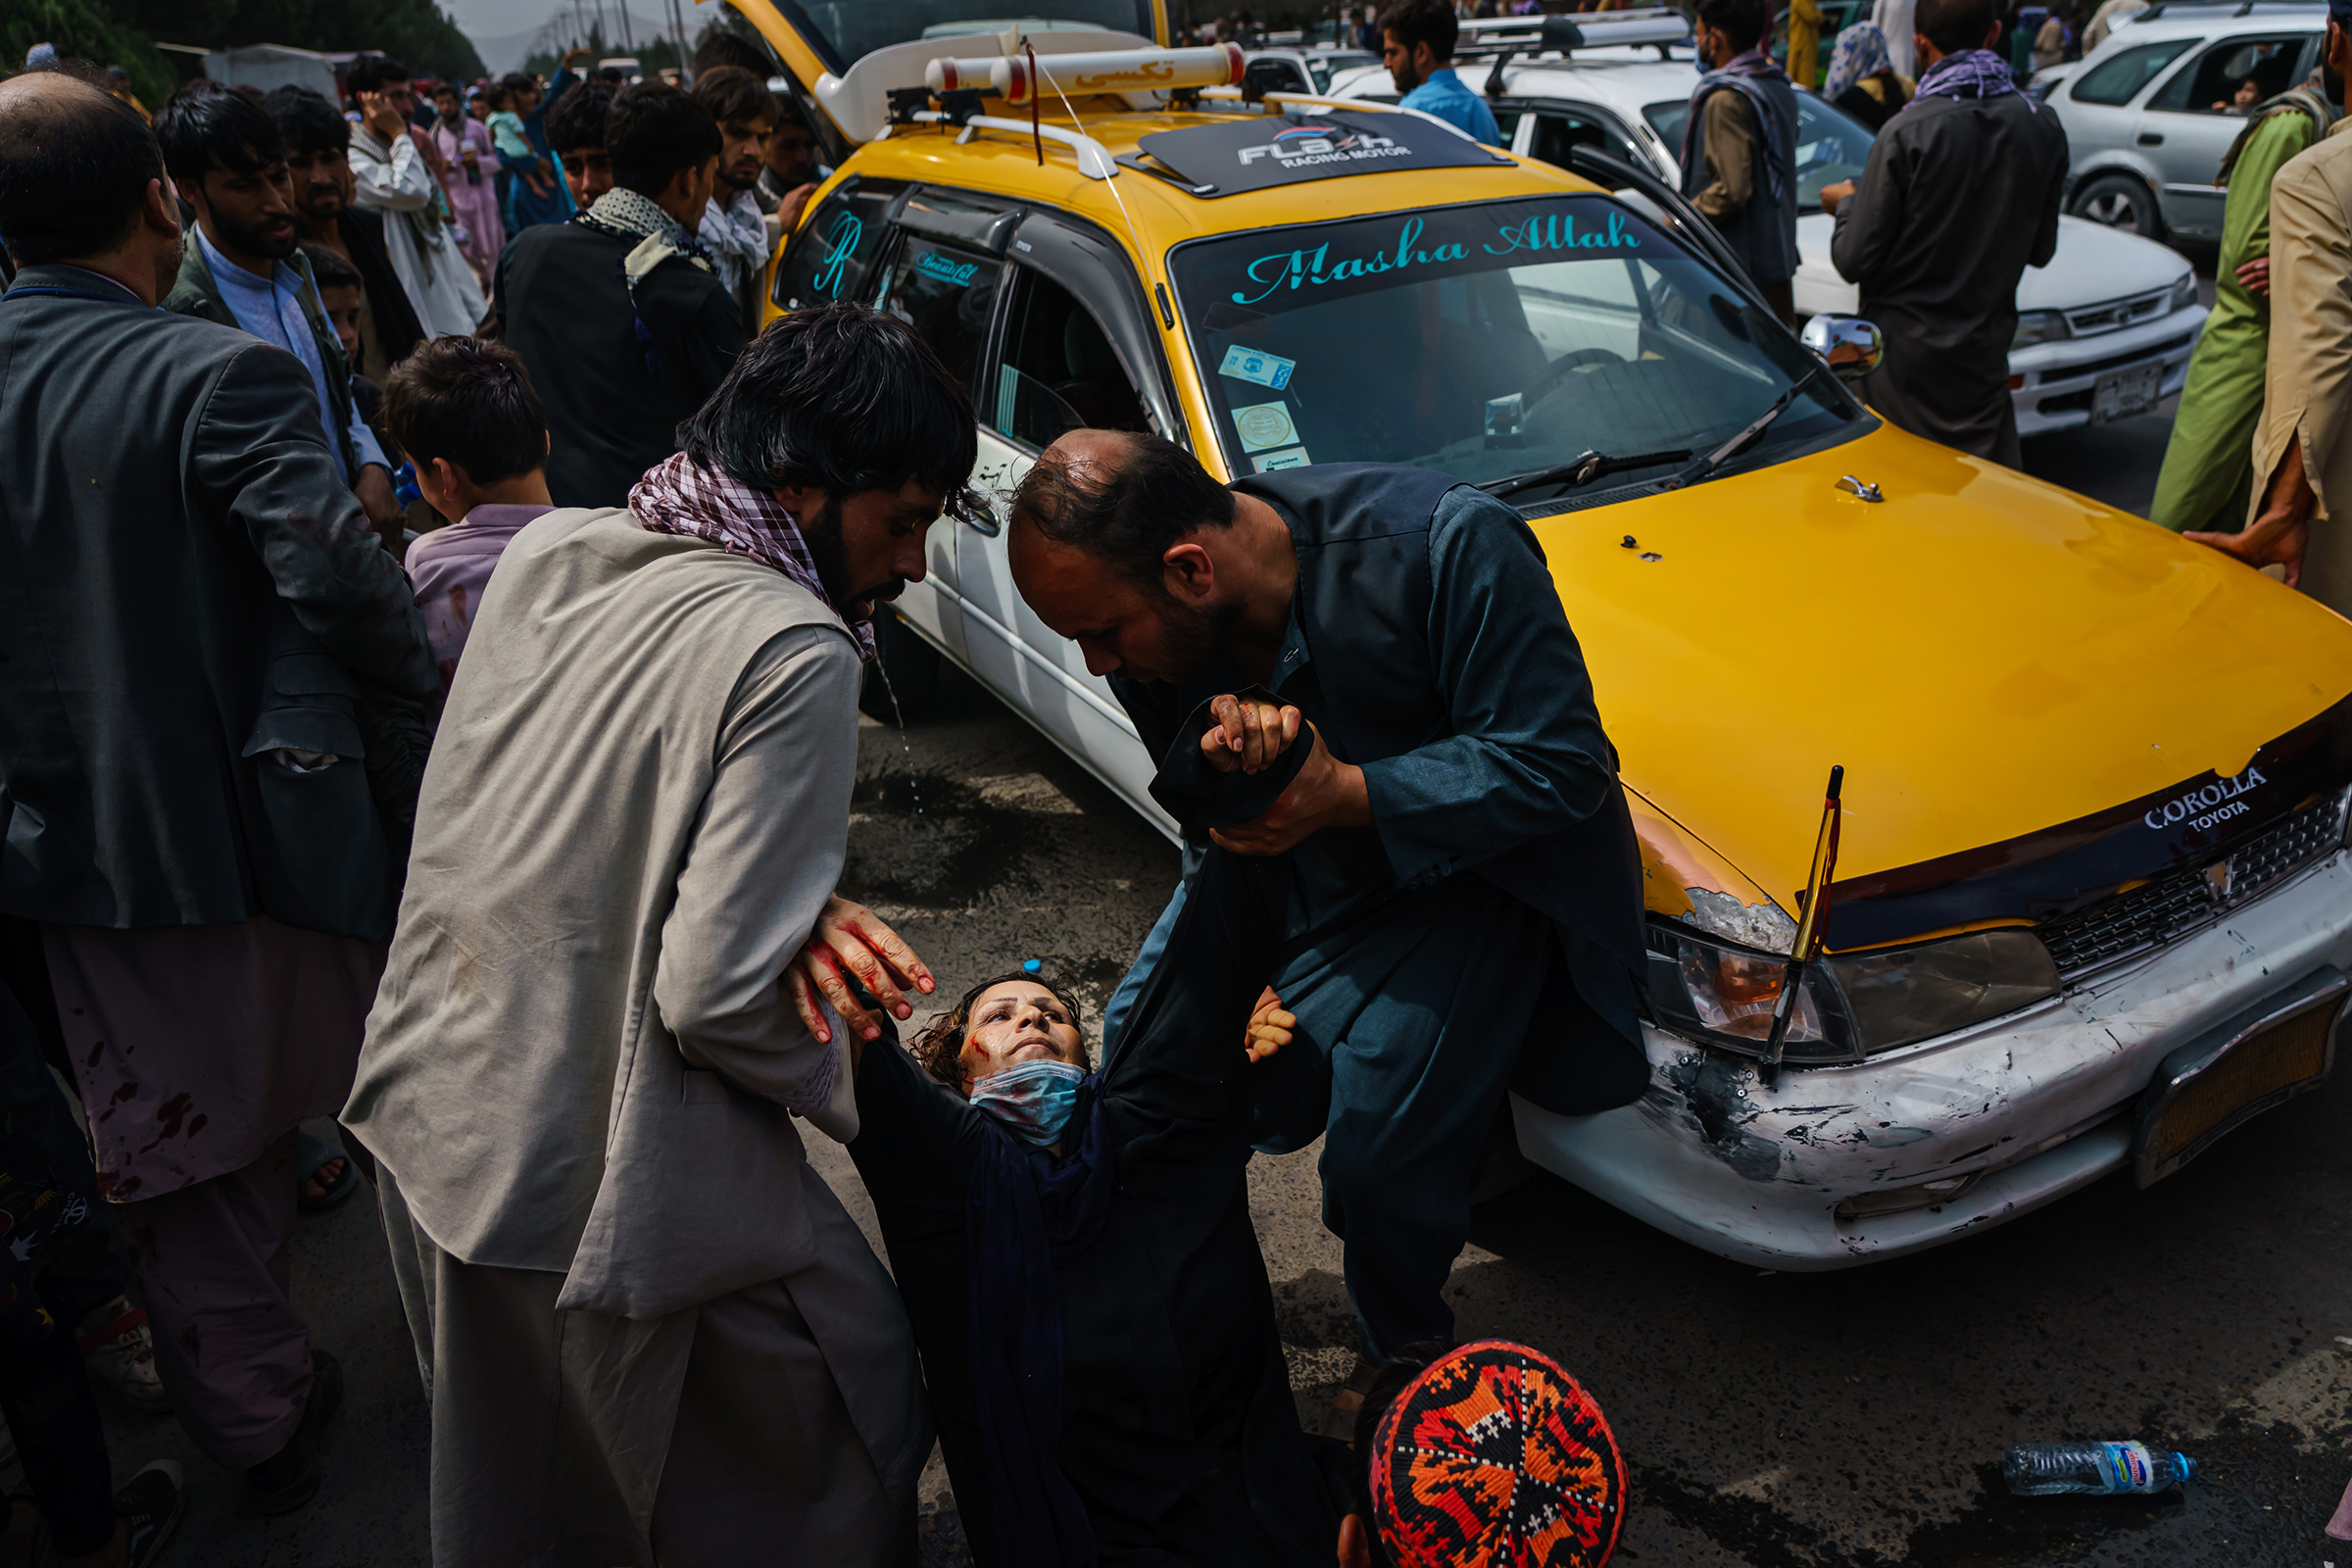 Men try to help a wounded woman and her child, who was also injured, after Taliban fighters use gunfire, whips, sticks and sharp objects to maintain control over a crowd of thousands waiting outside the airport in Kabul on Aug. 17, 2021.